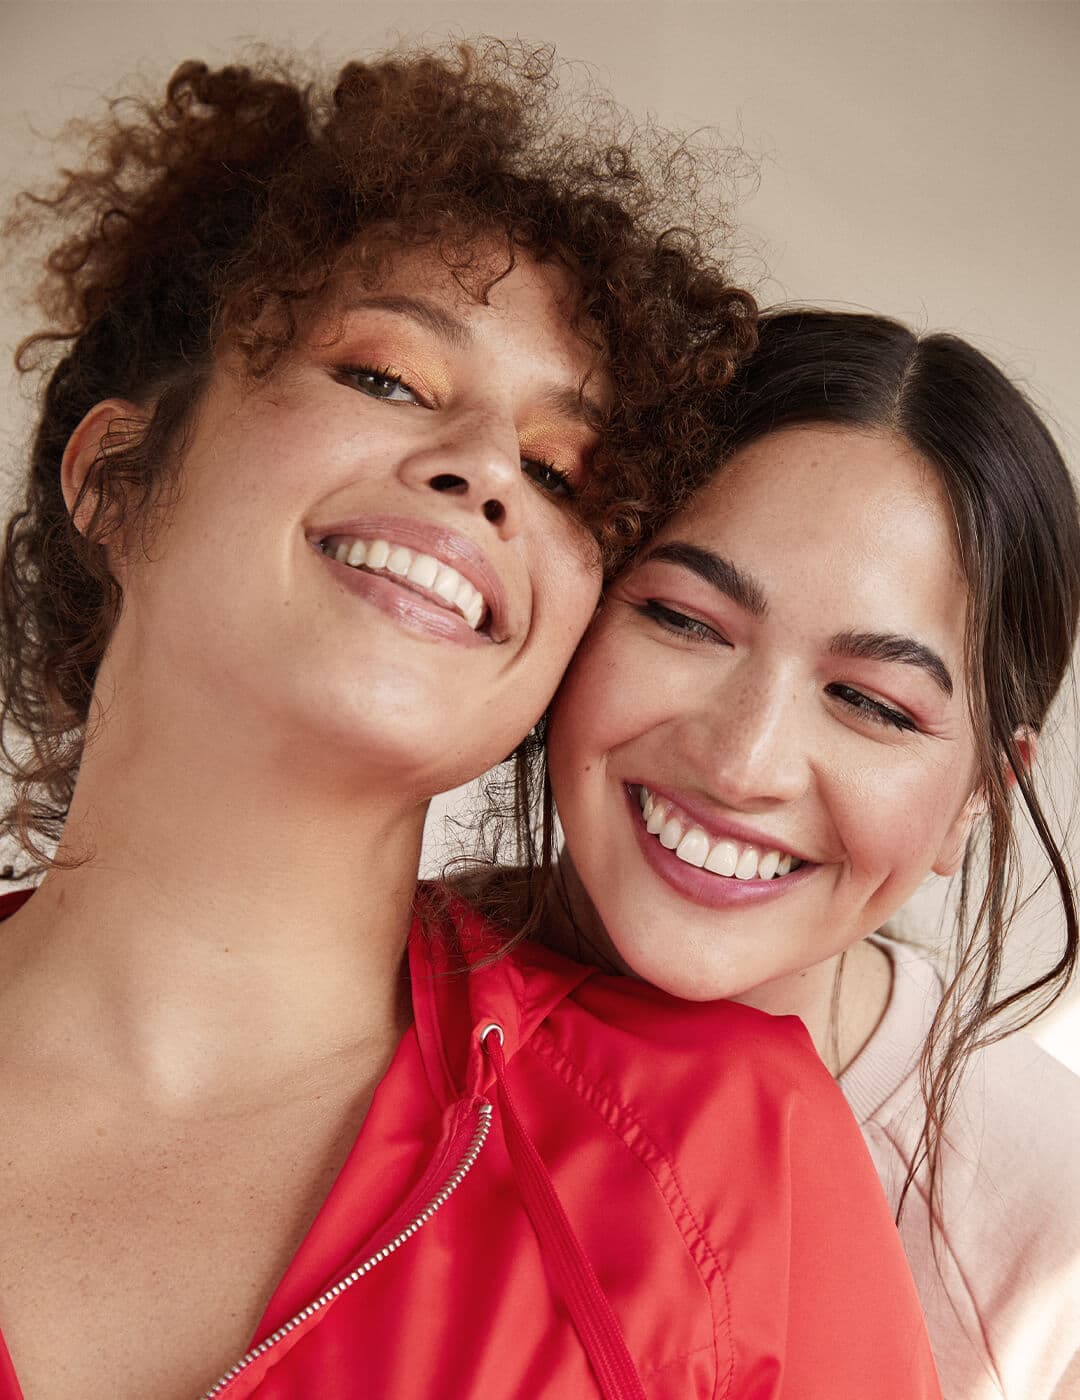 An image of two models with different hair types smiling.